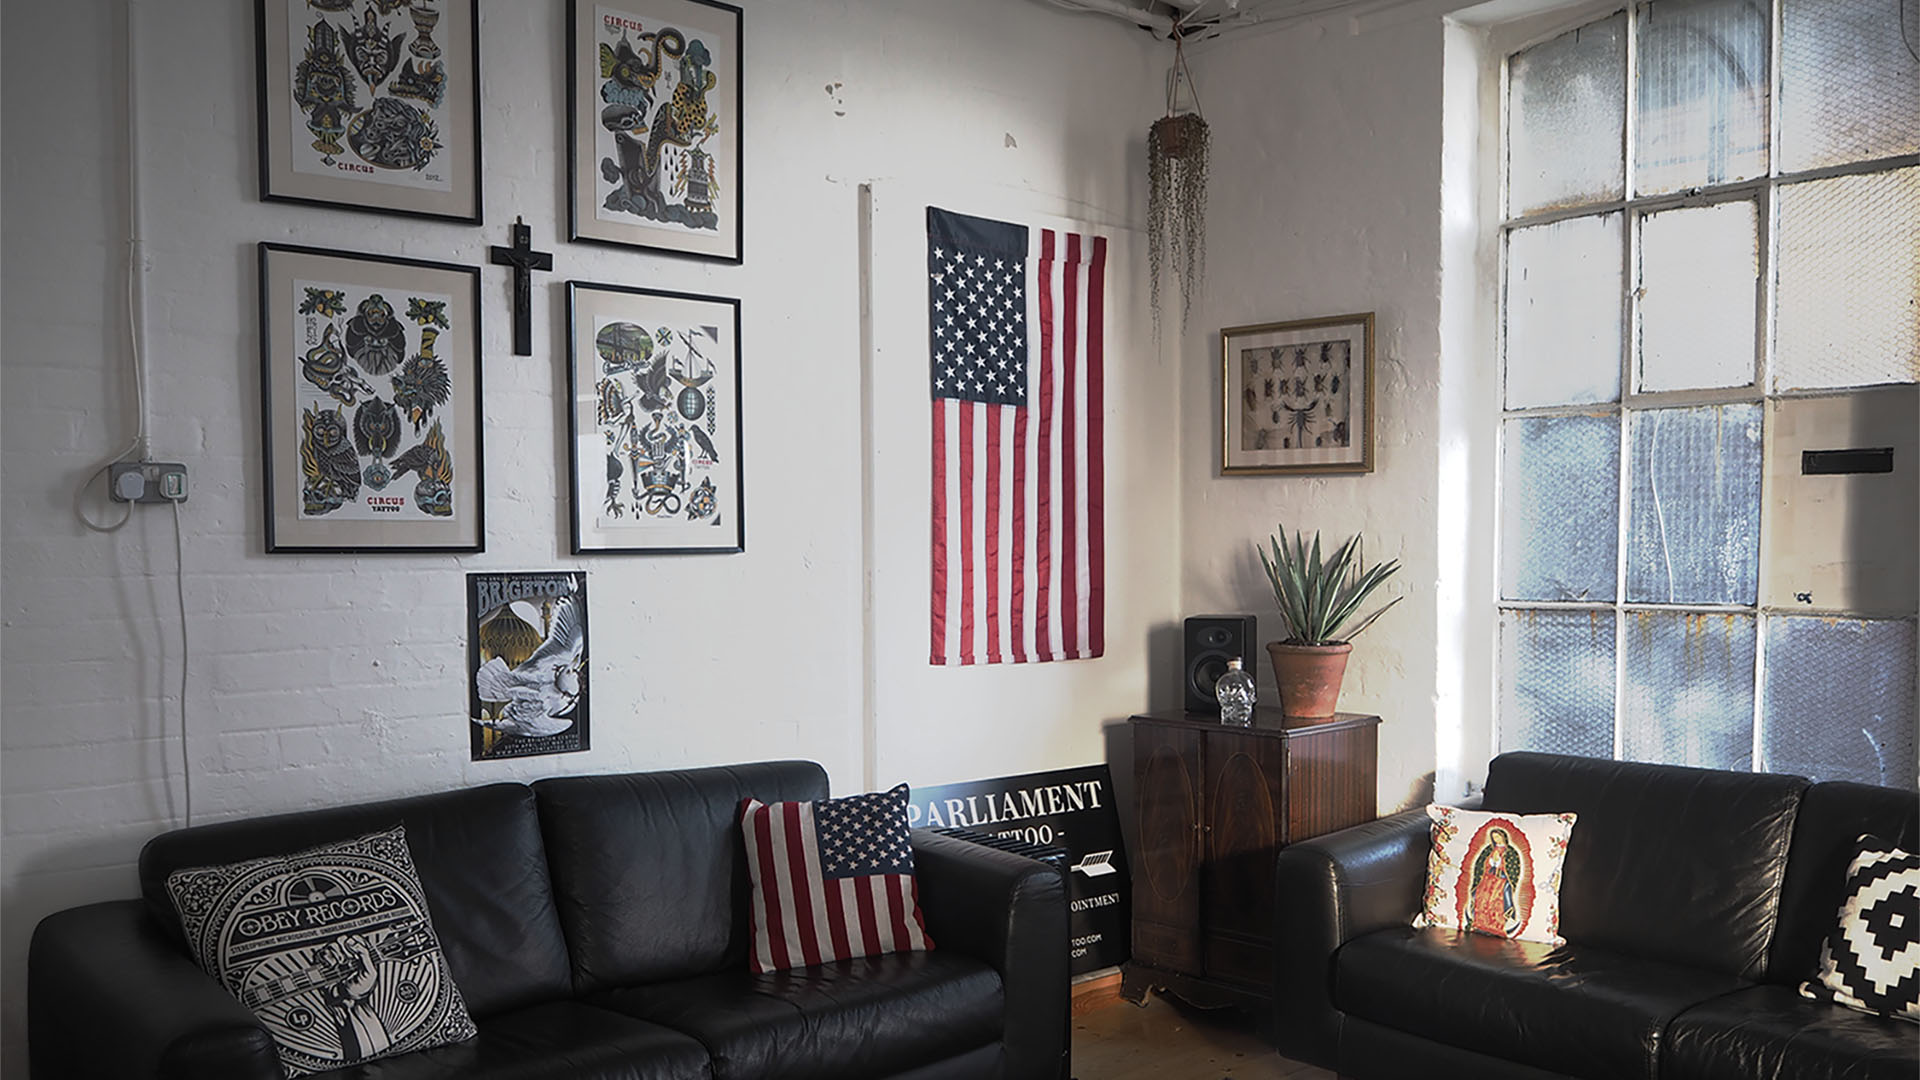 Reception room of Parliament tattoo featuring two leather sofas, drawings of tattoos and an American flag hanging on a white wall.